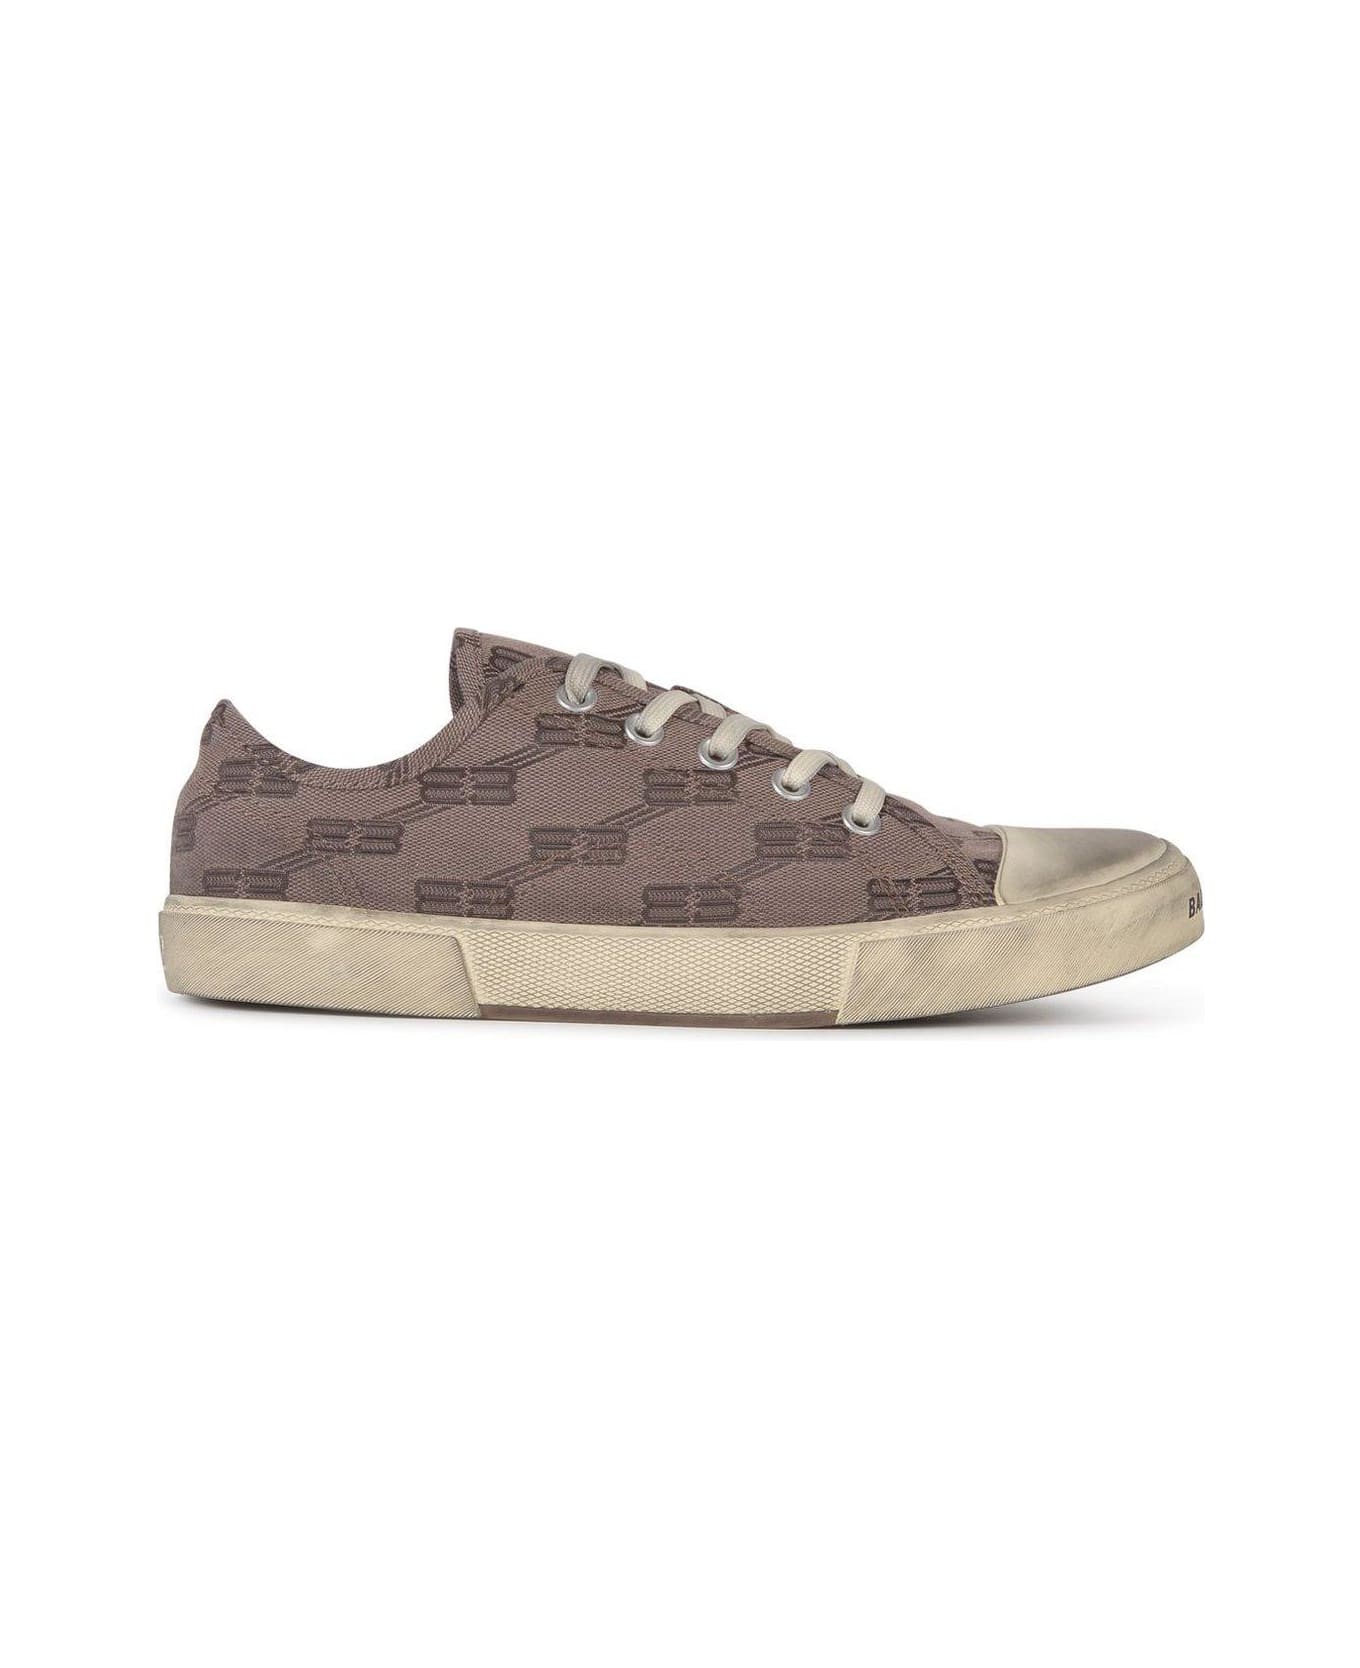 Balenciaga All-over Monogram Print Laced Sneakers - Brown